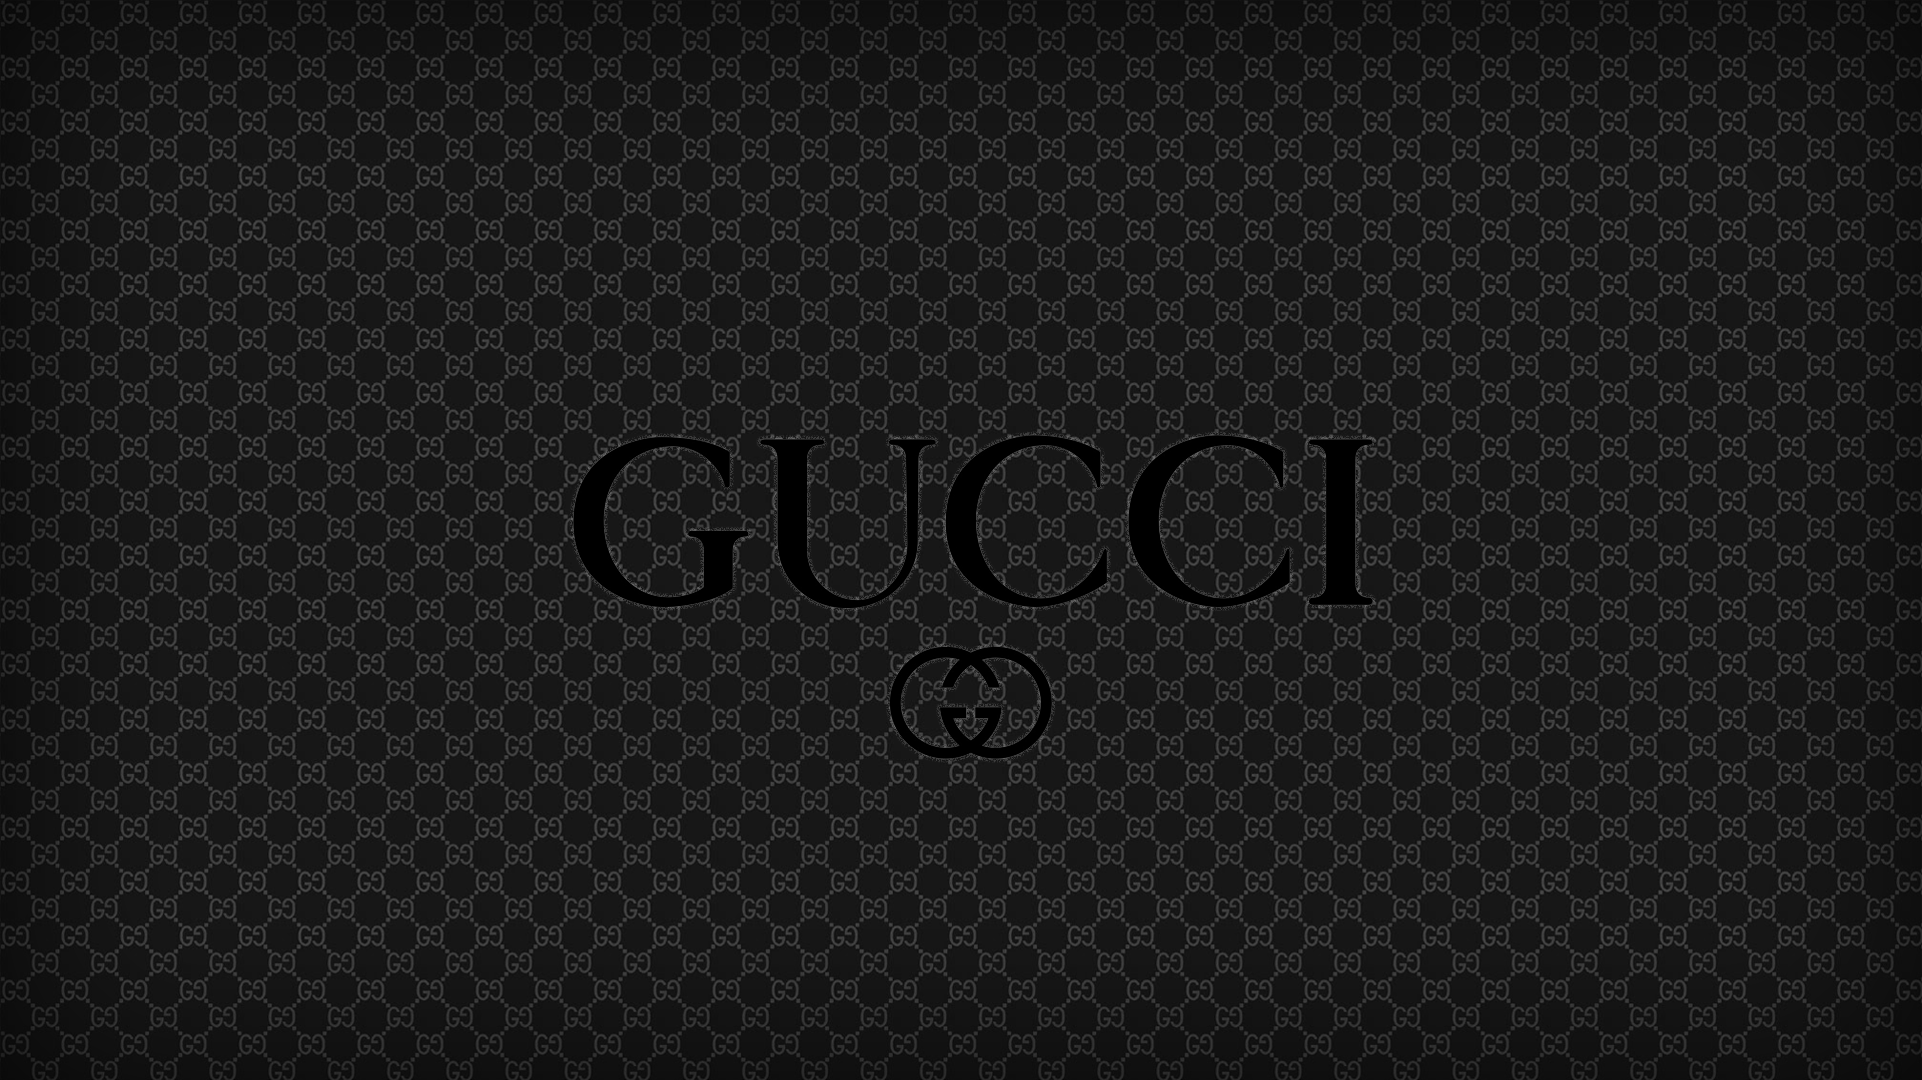 Gucci HD Wallpapers   HD Wallpapers 1922x1080